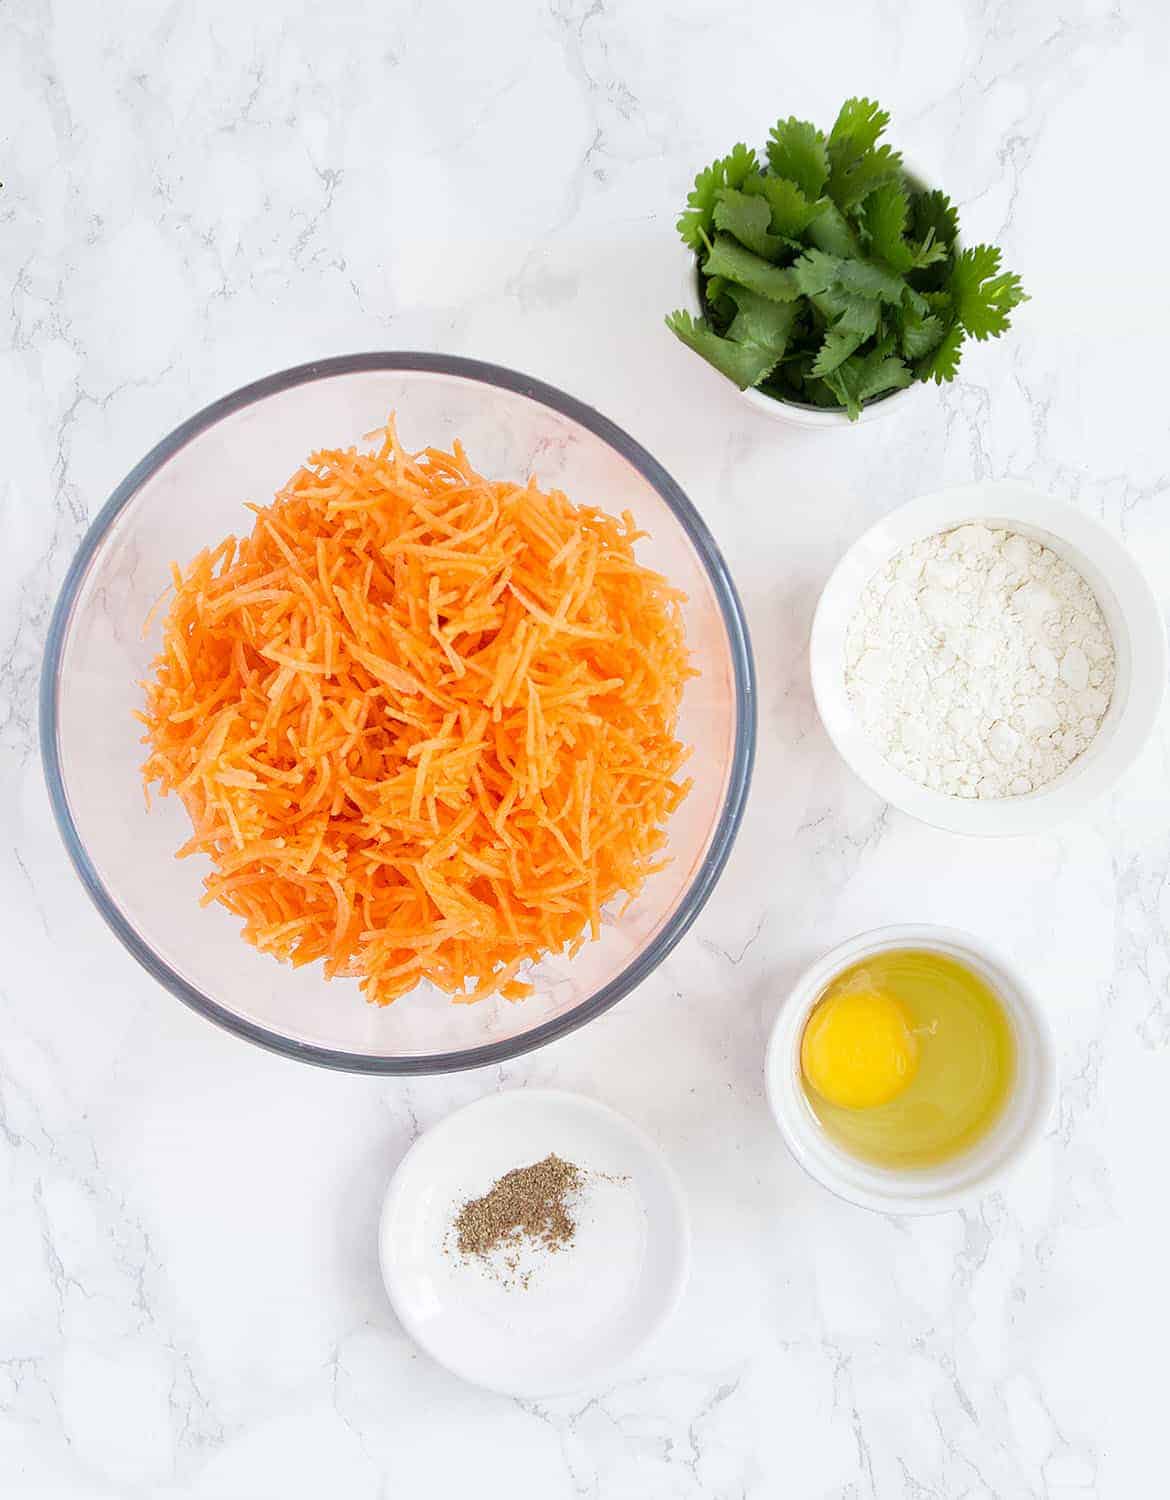 The ingredients to make carrot fritters are arranged on a white marble table.